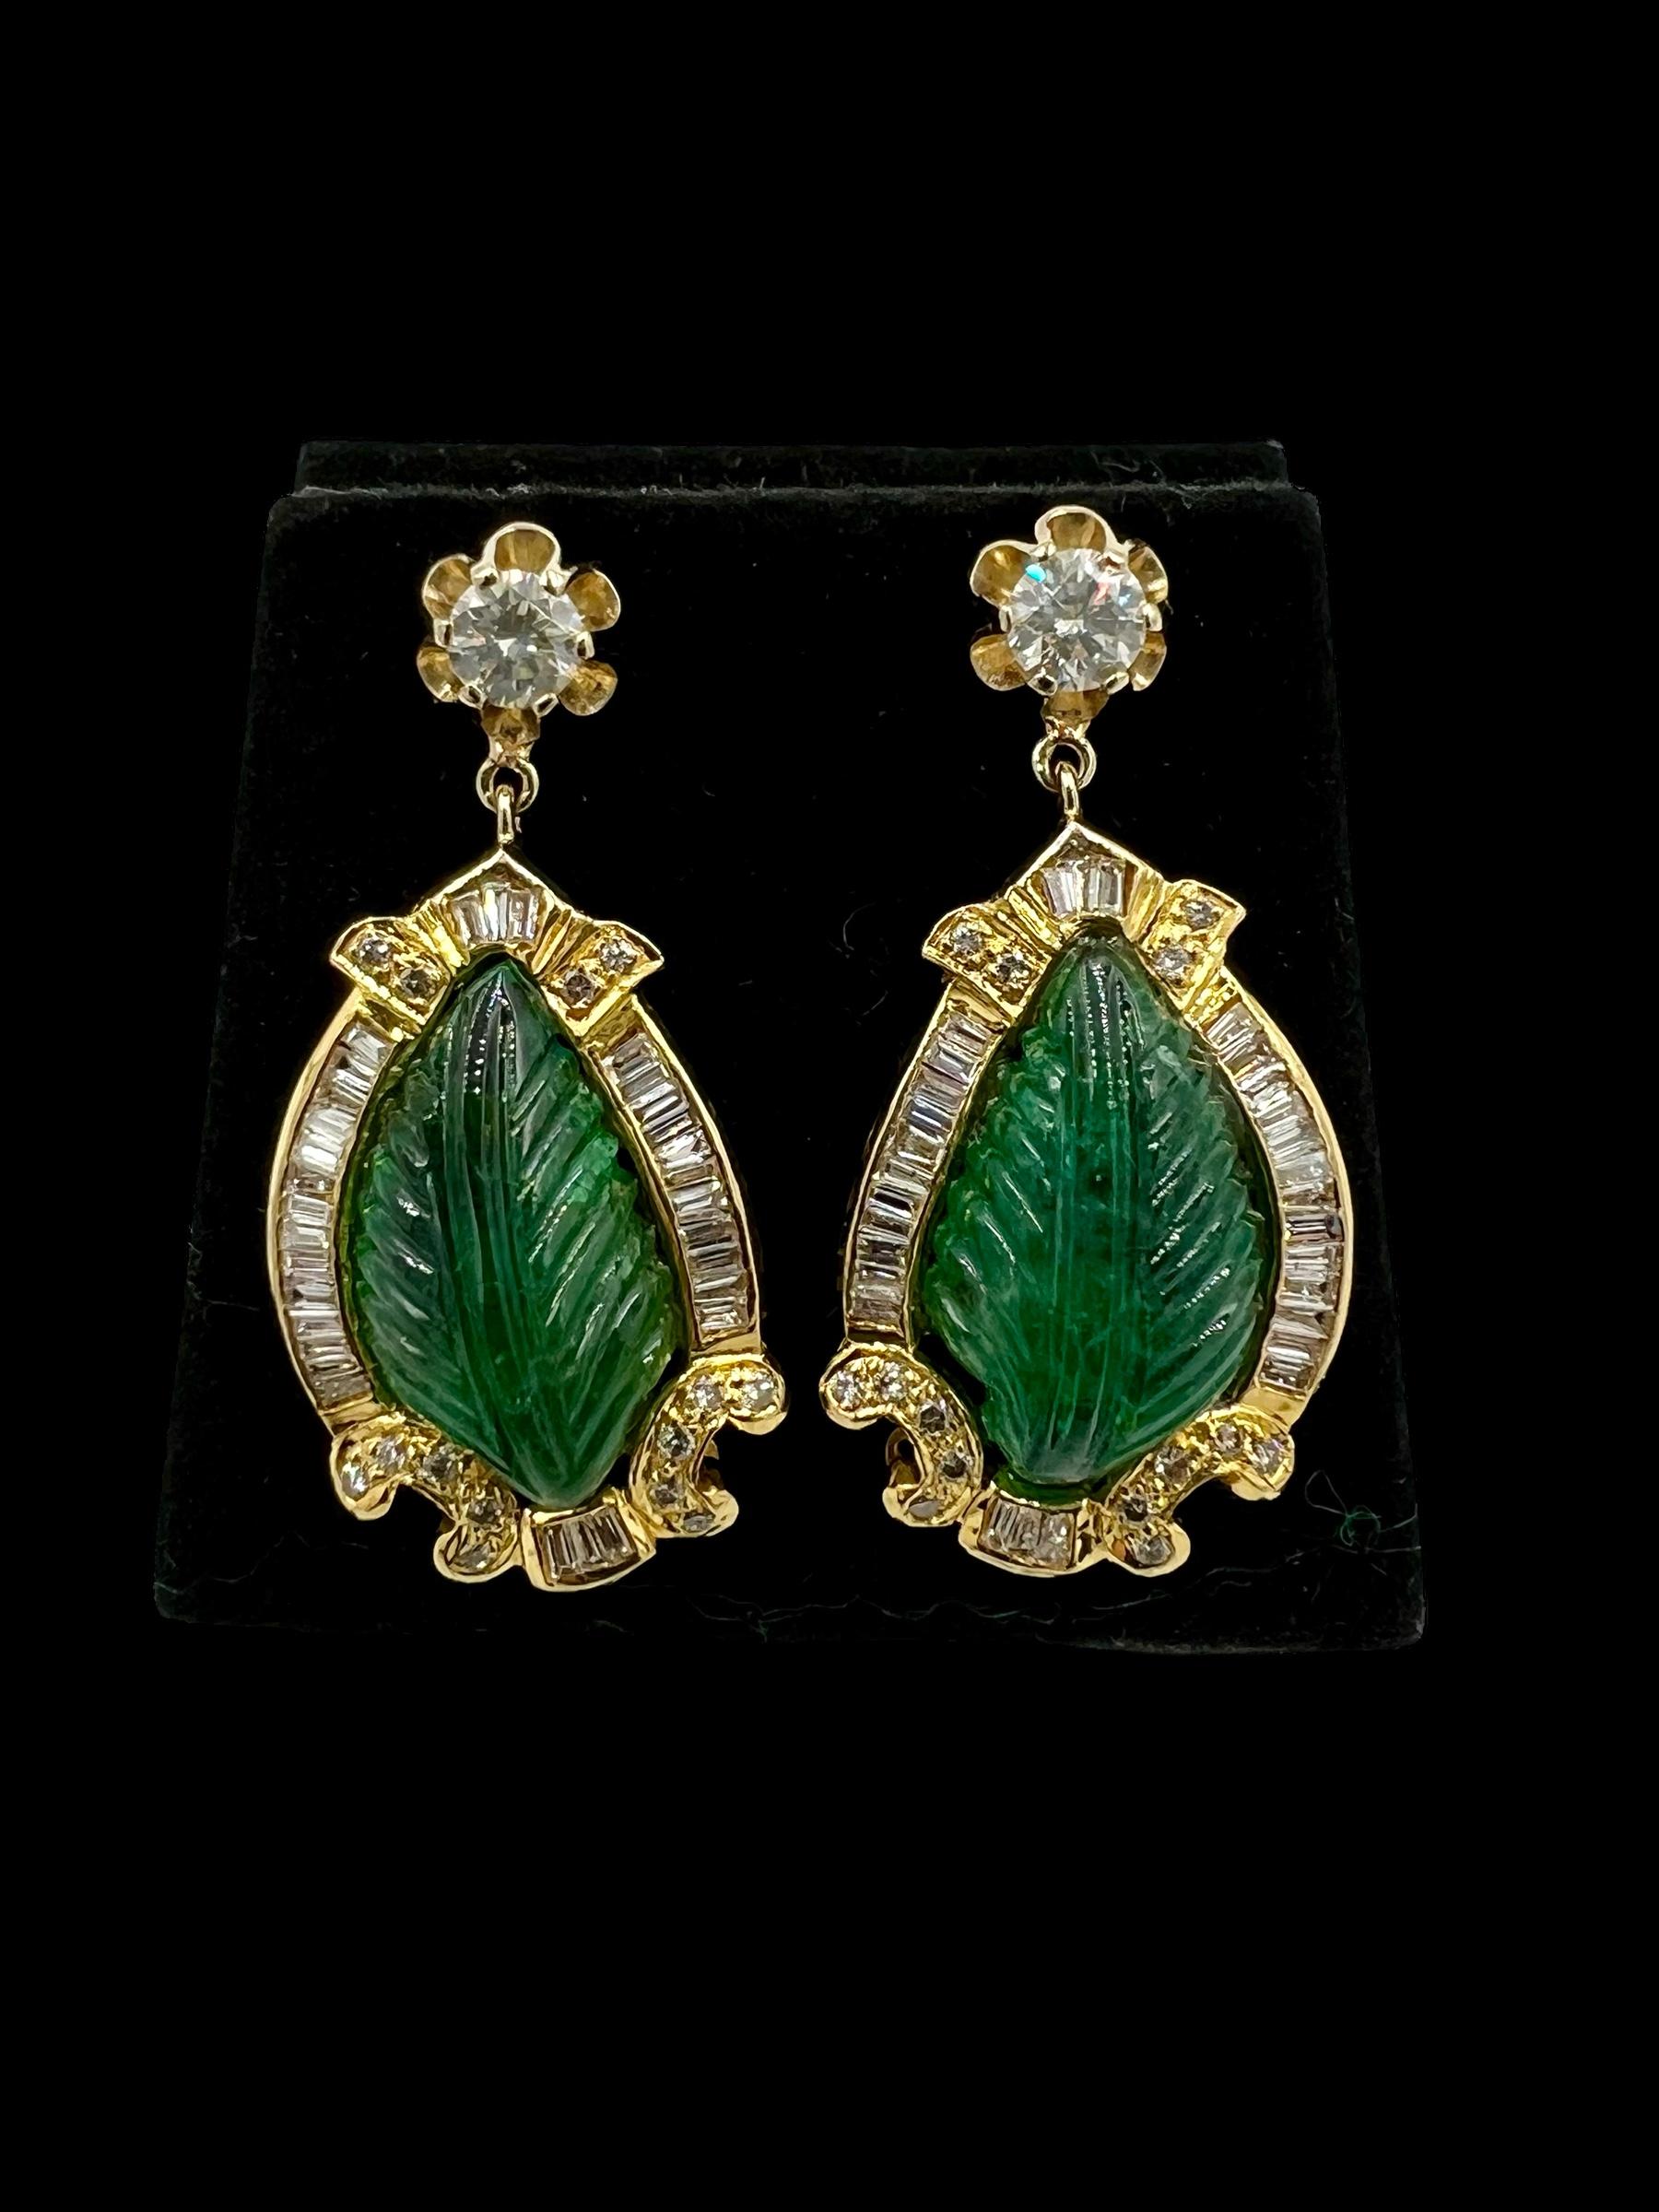 Vintage carved Emerald Diamond yellow gold drop earrings, circa 1970s.

Vintage Carved Emerald Diamond Yellow Gold Drop Earrings are a true testament to the timeless beauty and elegance of vintage jewelry. Crafted with exquisite attention to detail,